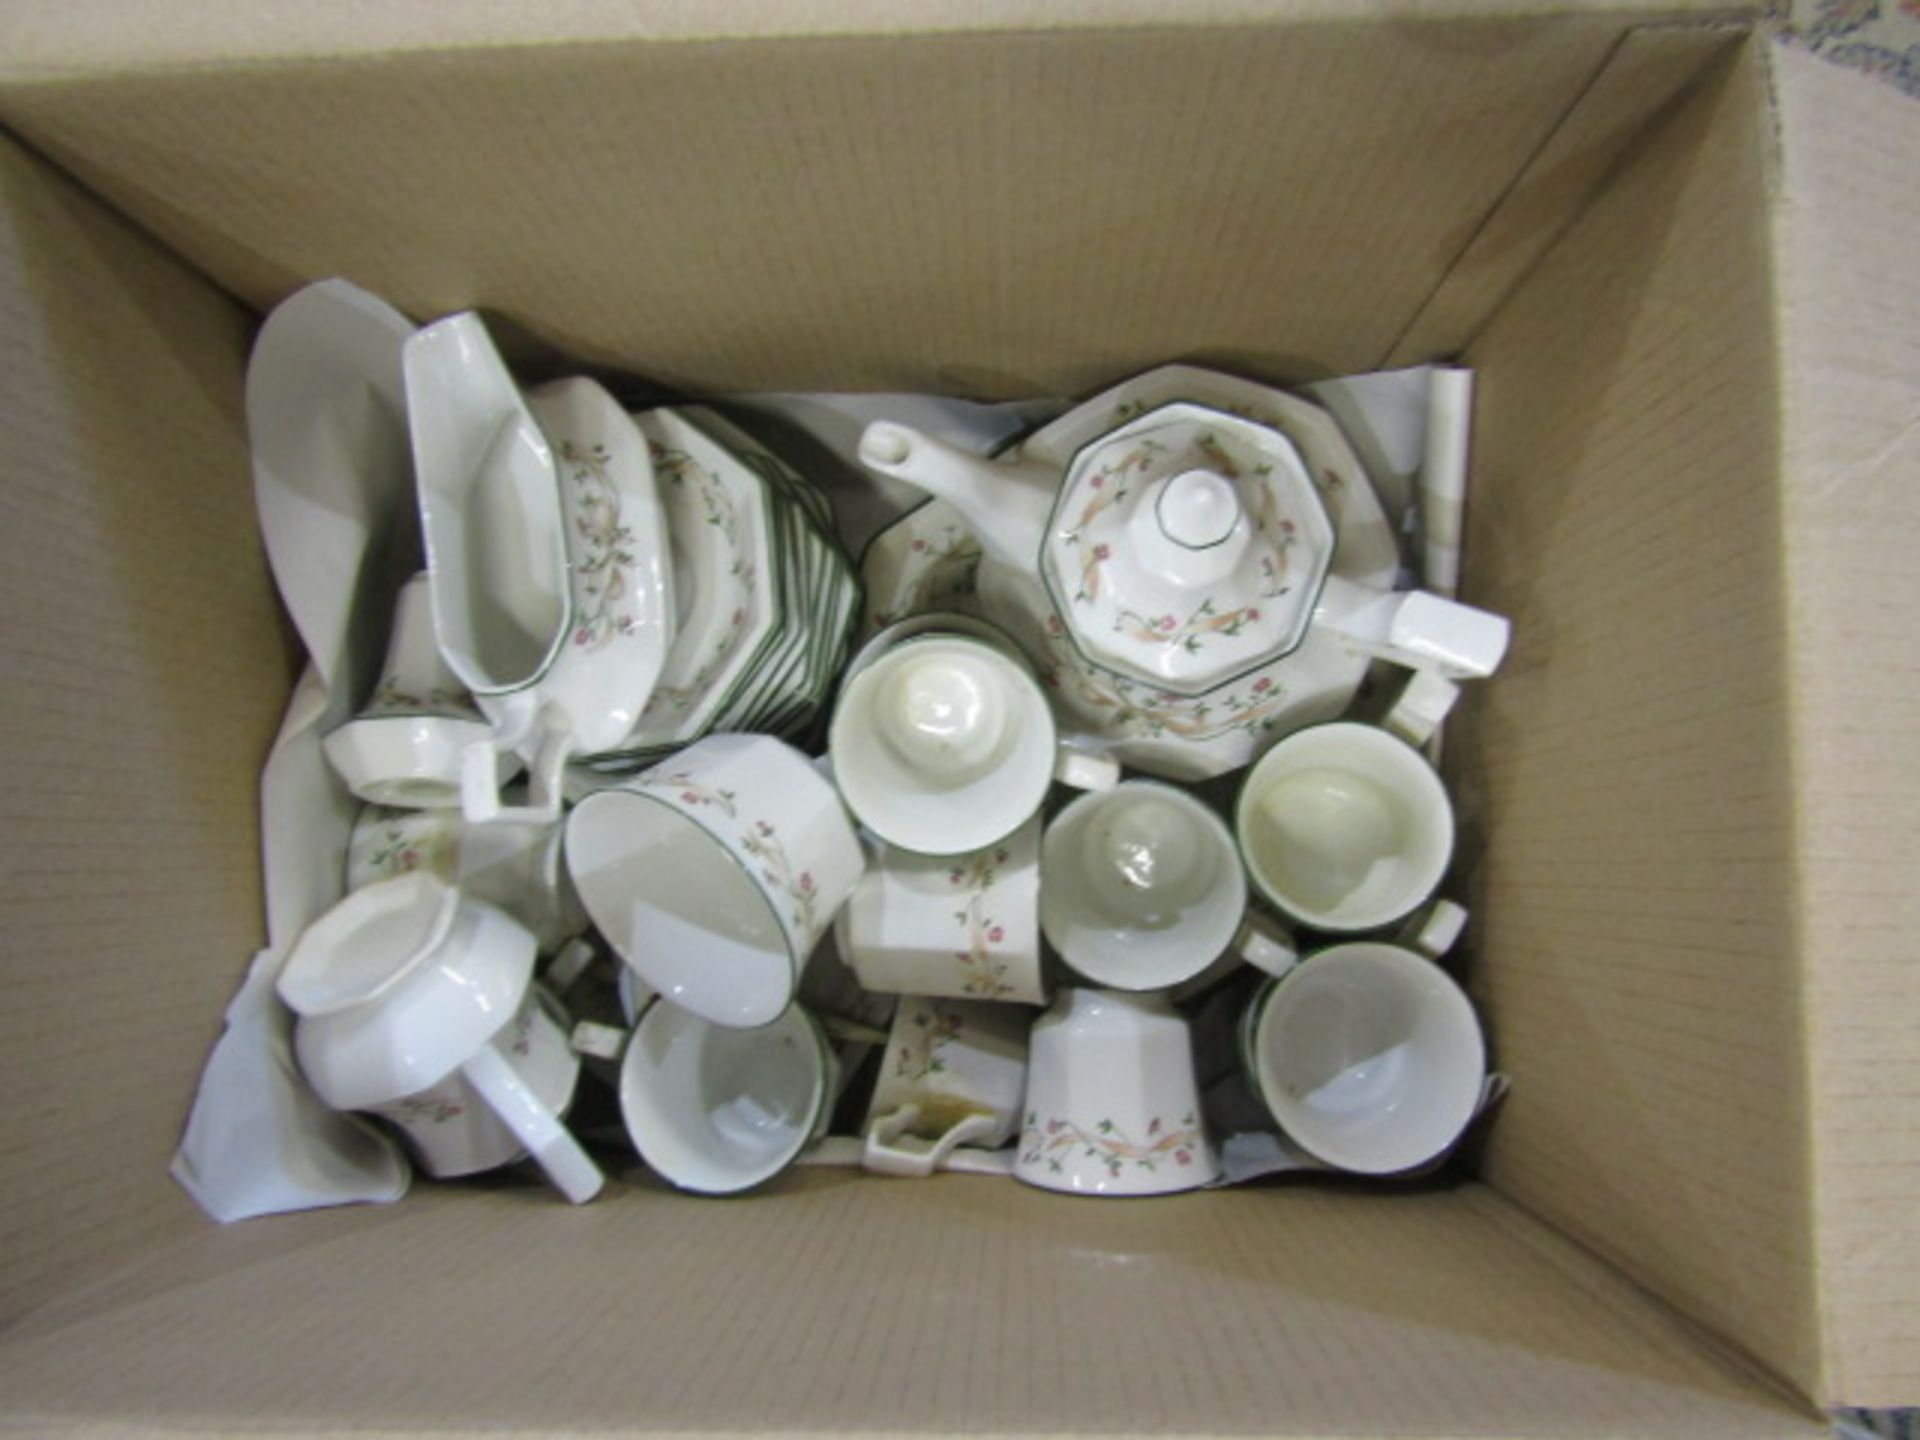 A stillage of china, glass and sundry items Stillage not included and all items must be removed - Image 5 of 15